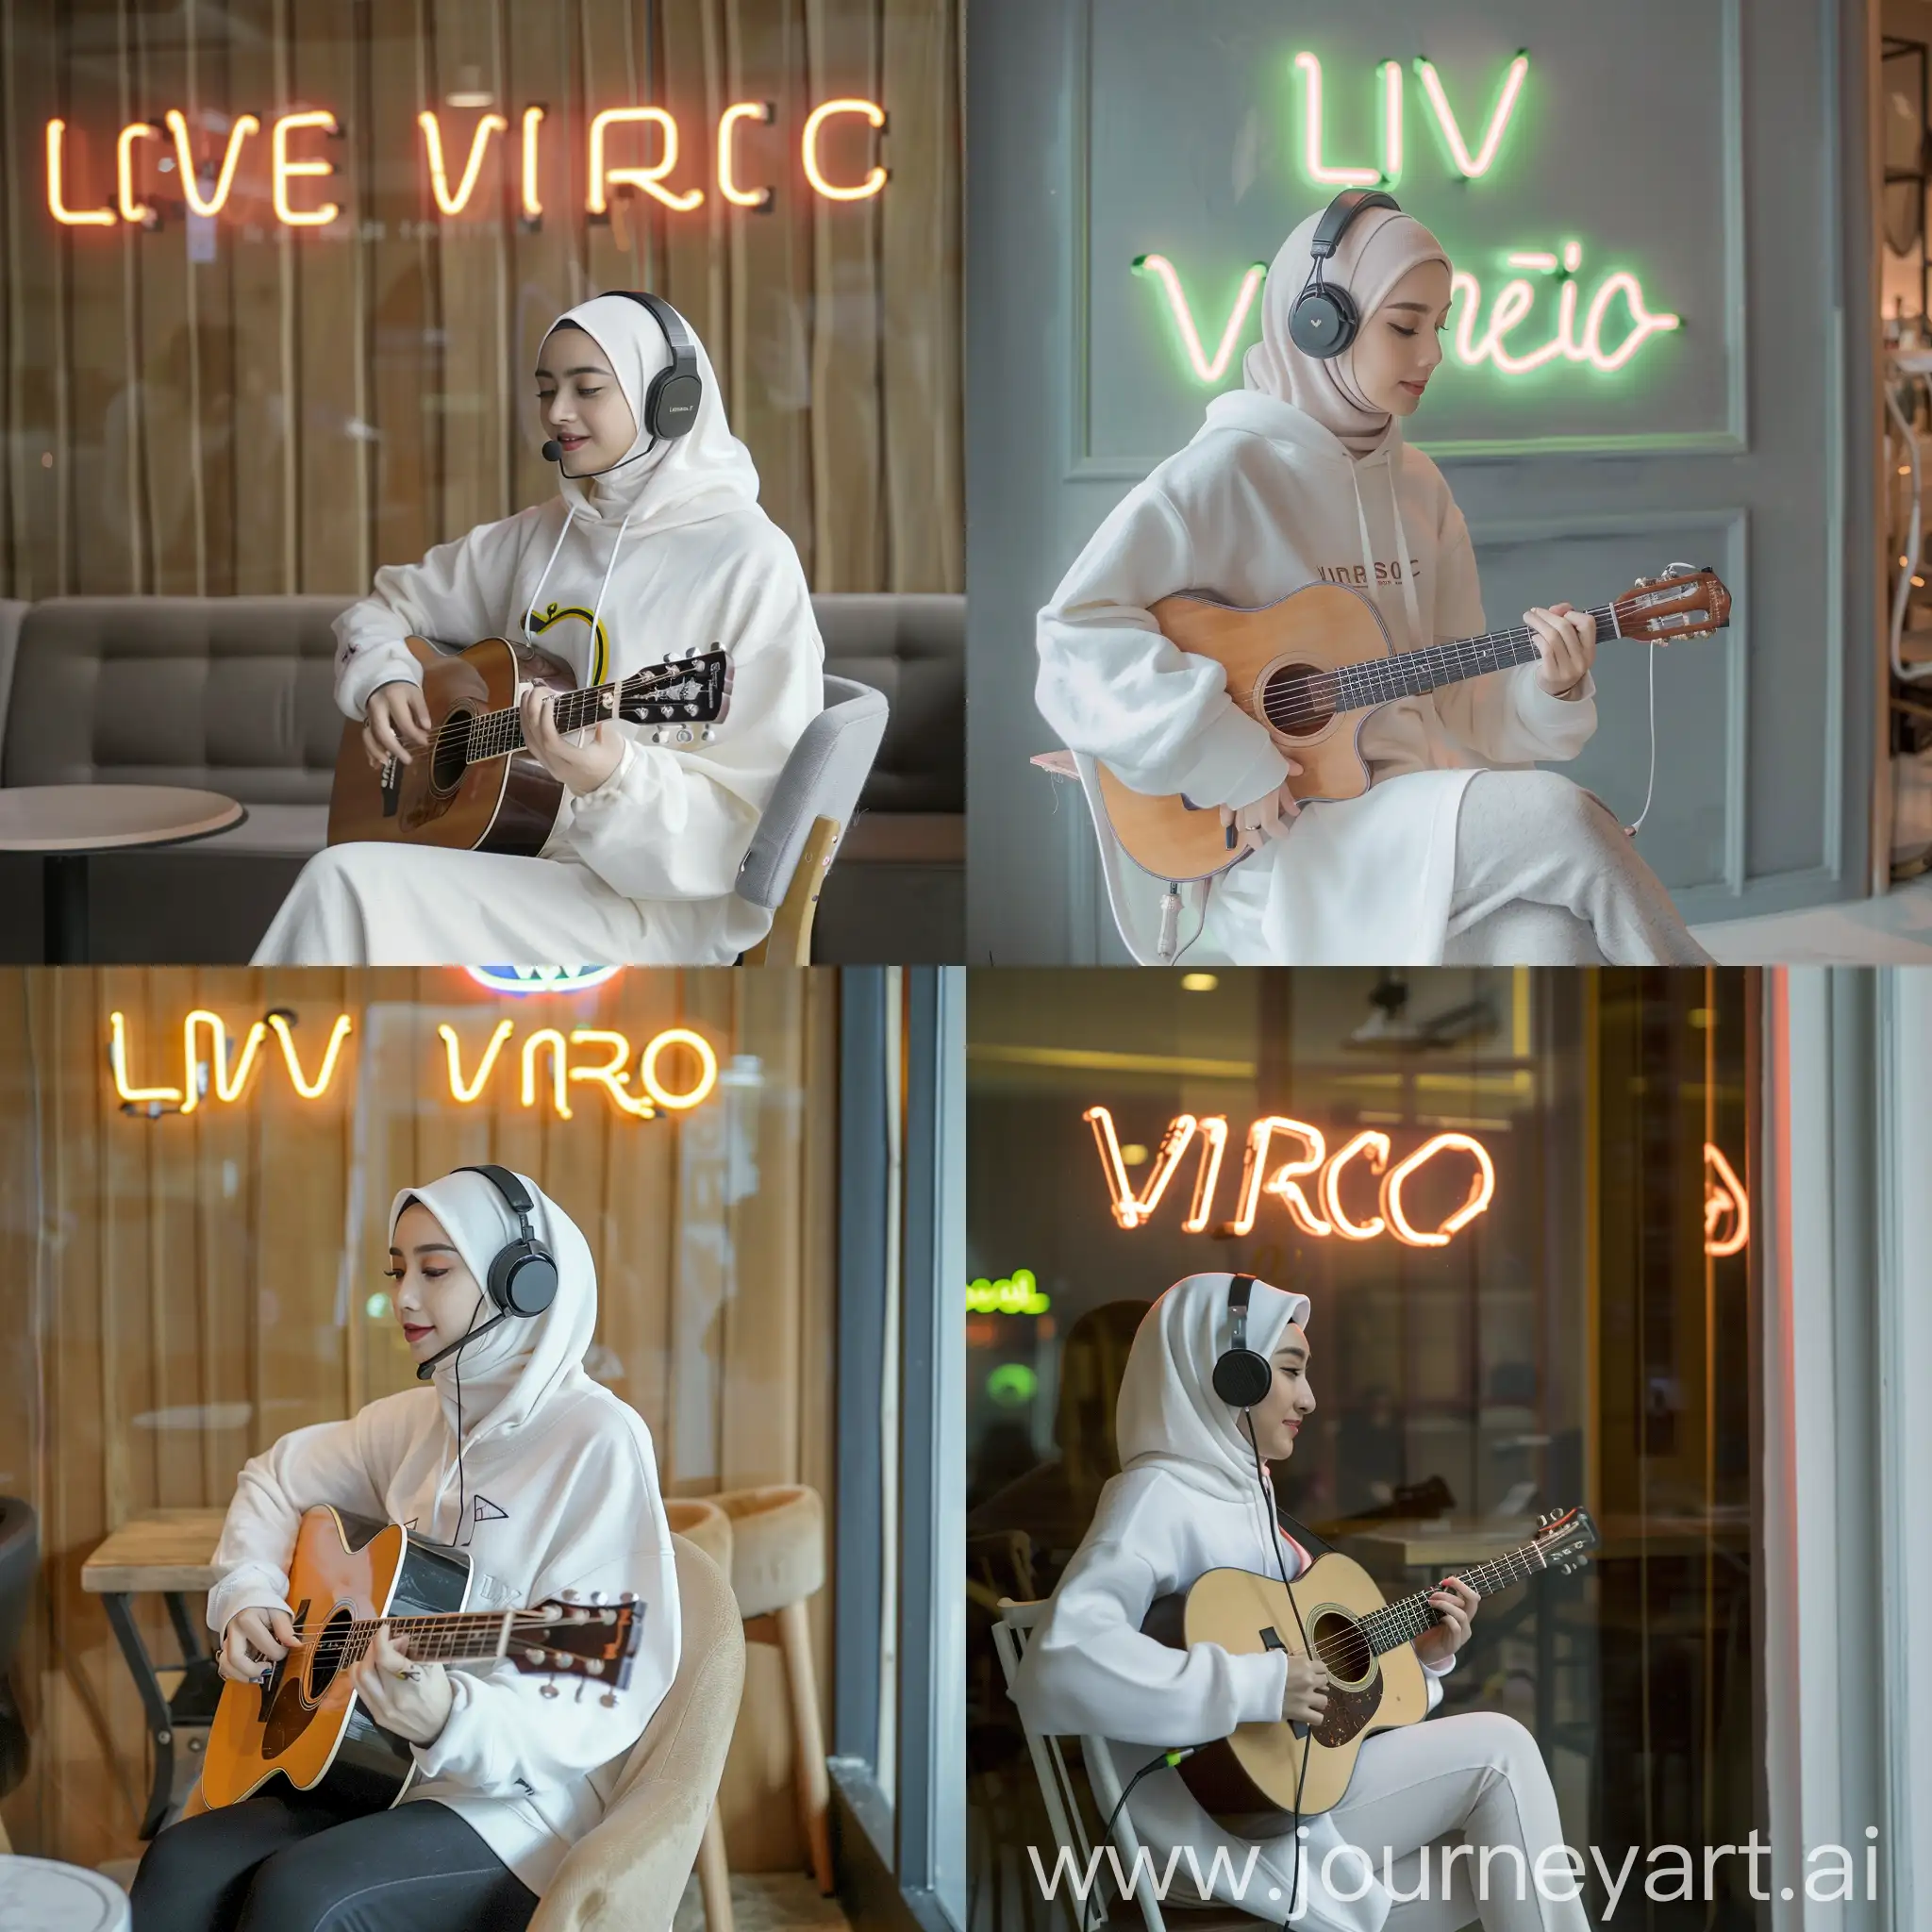 Indonesian-Hijab-Woman-Performing-Acoustic-Music-in-Coffee-Shop